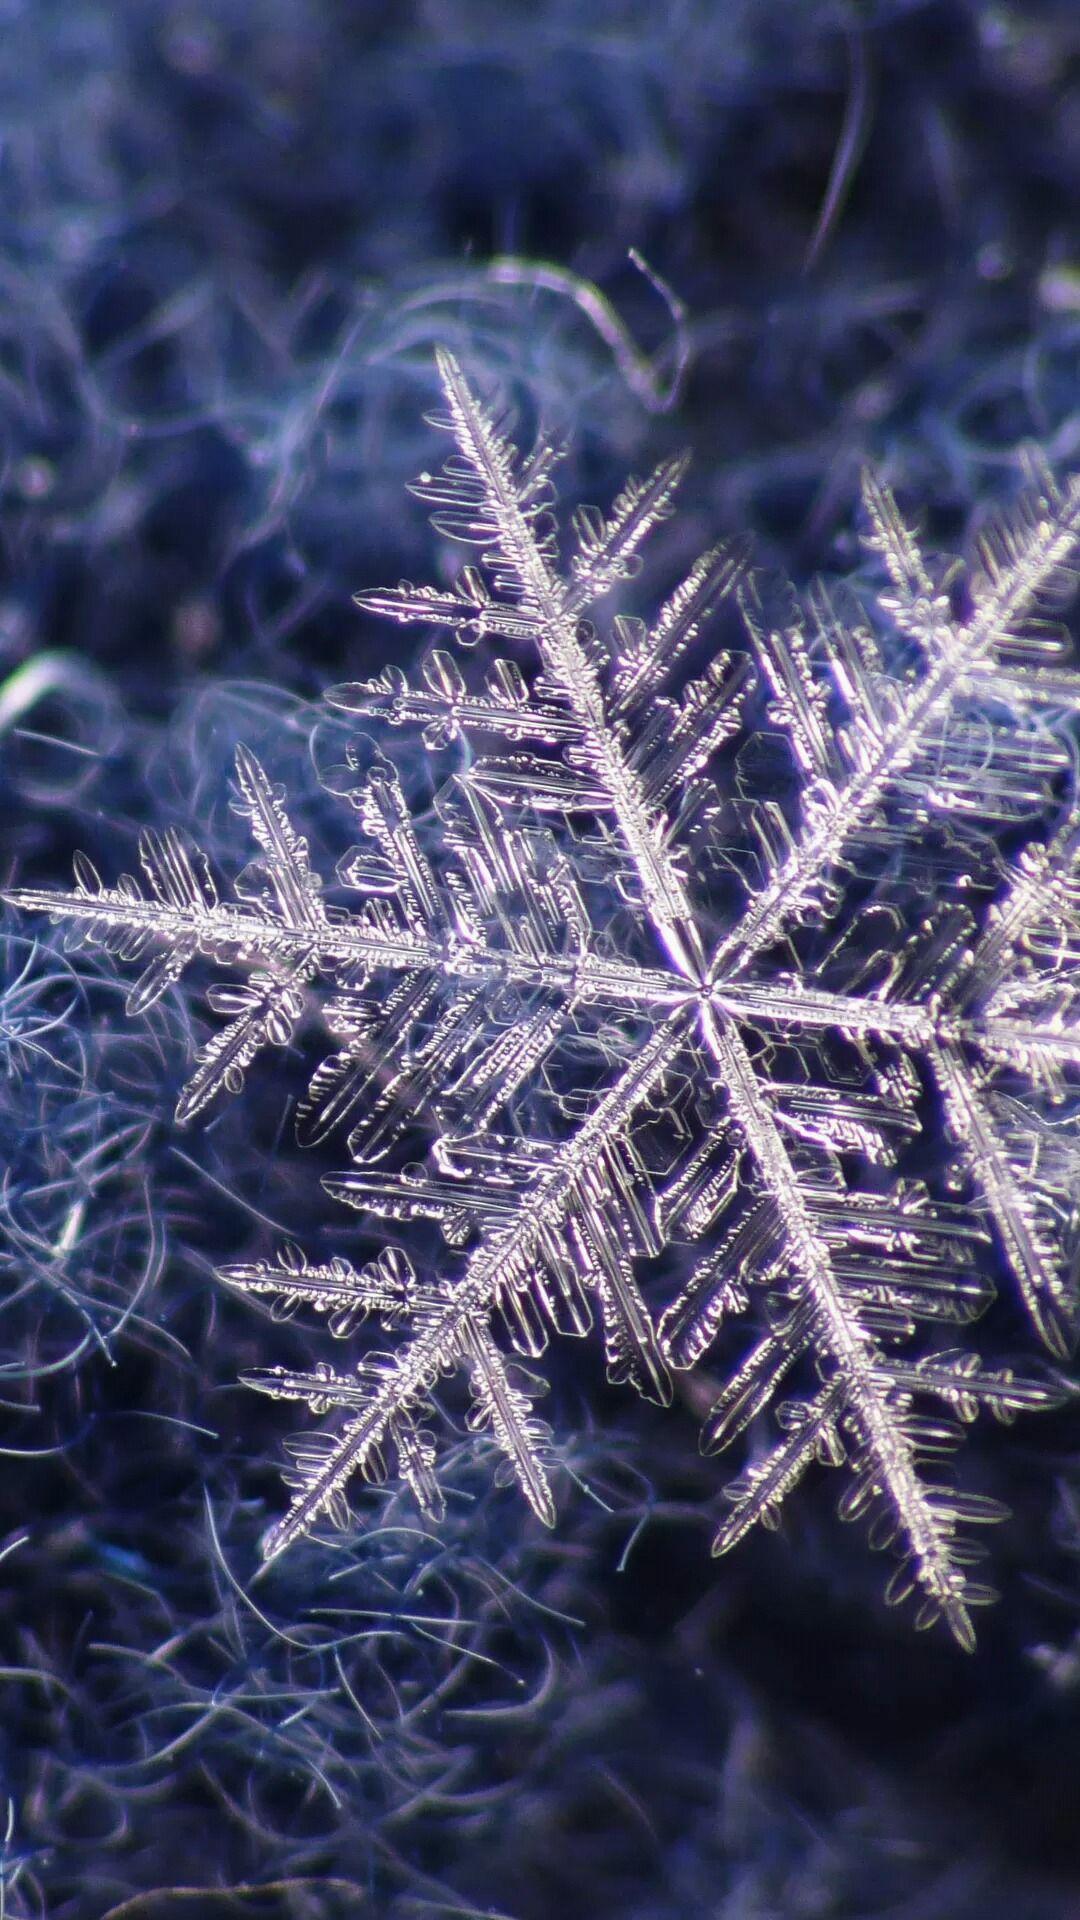 Cool frozen snowflakes to see more #beautiful #snow